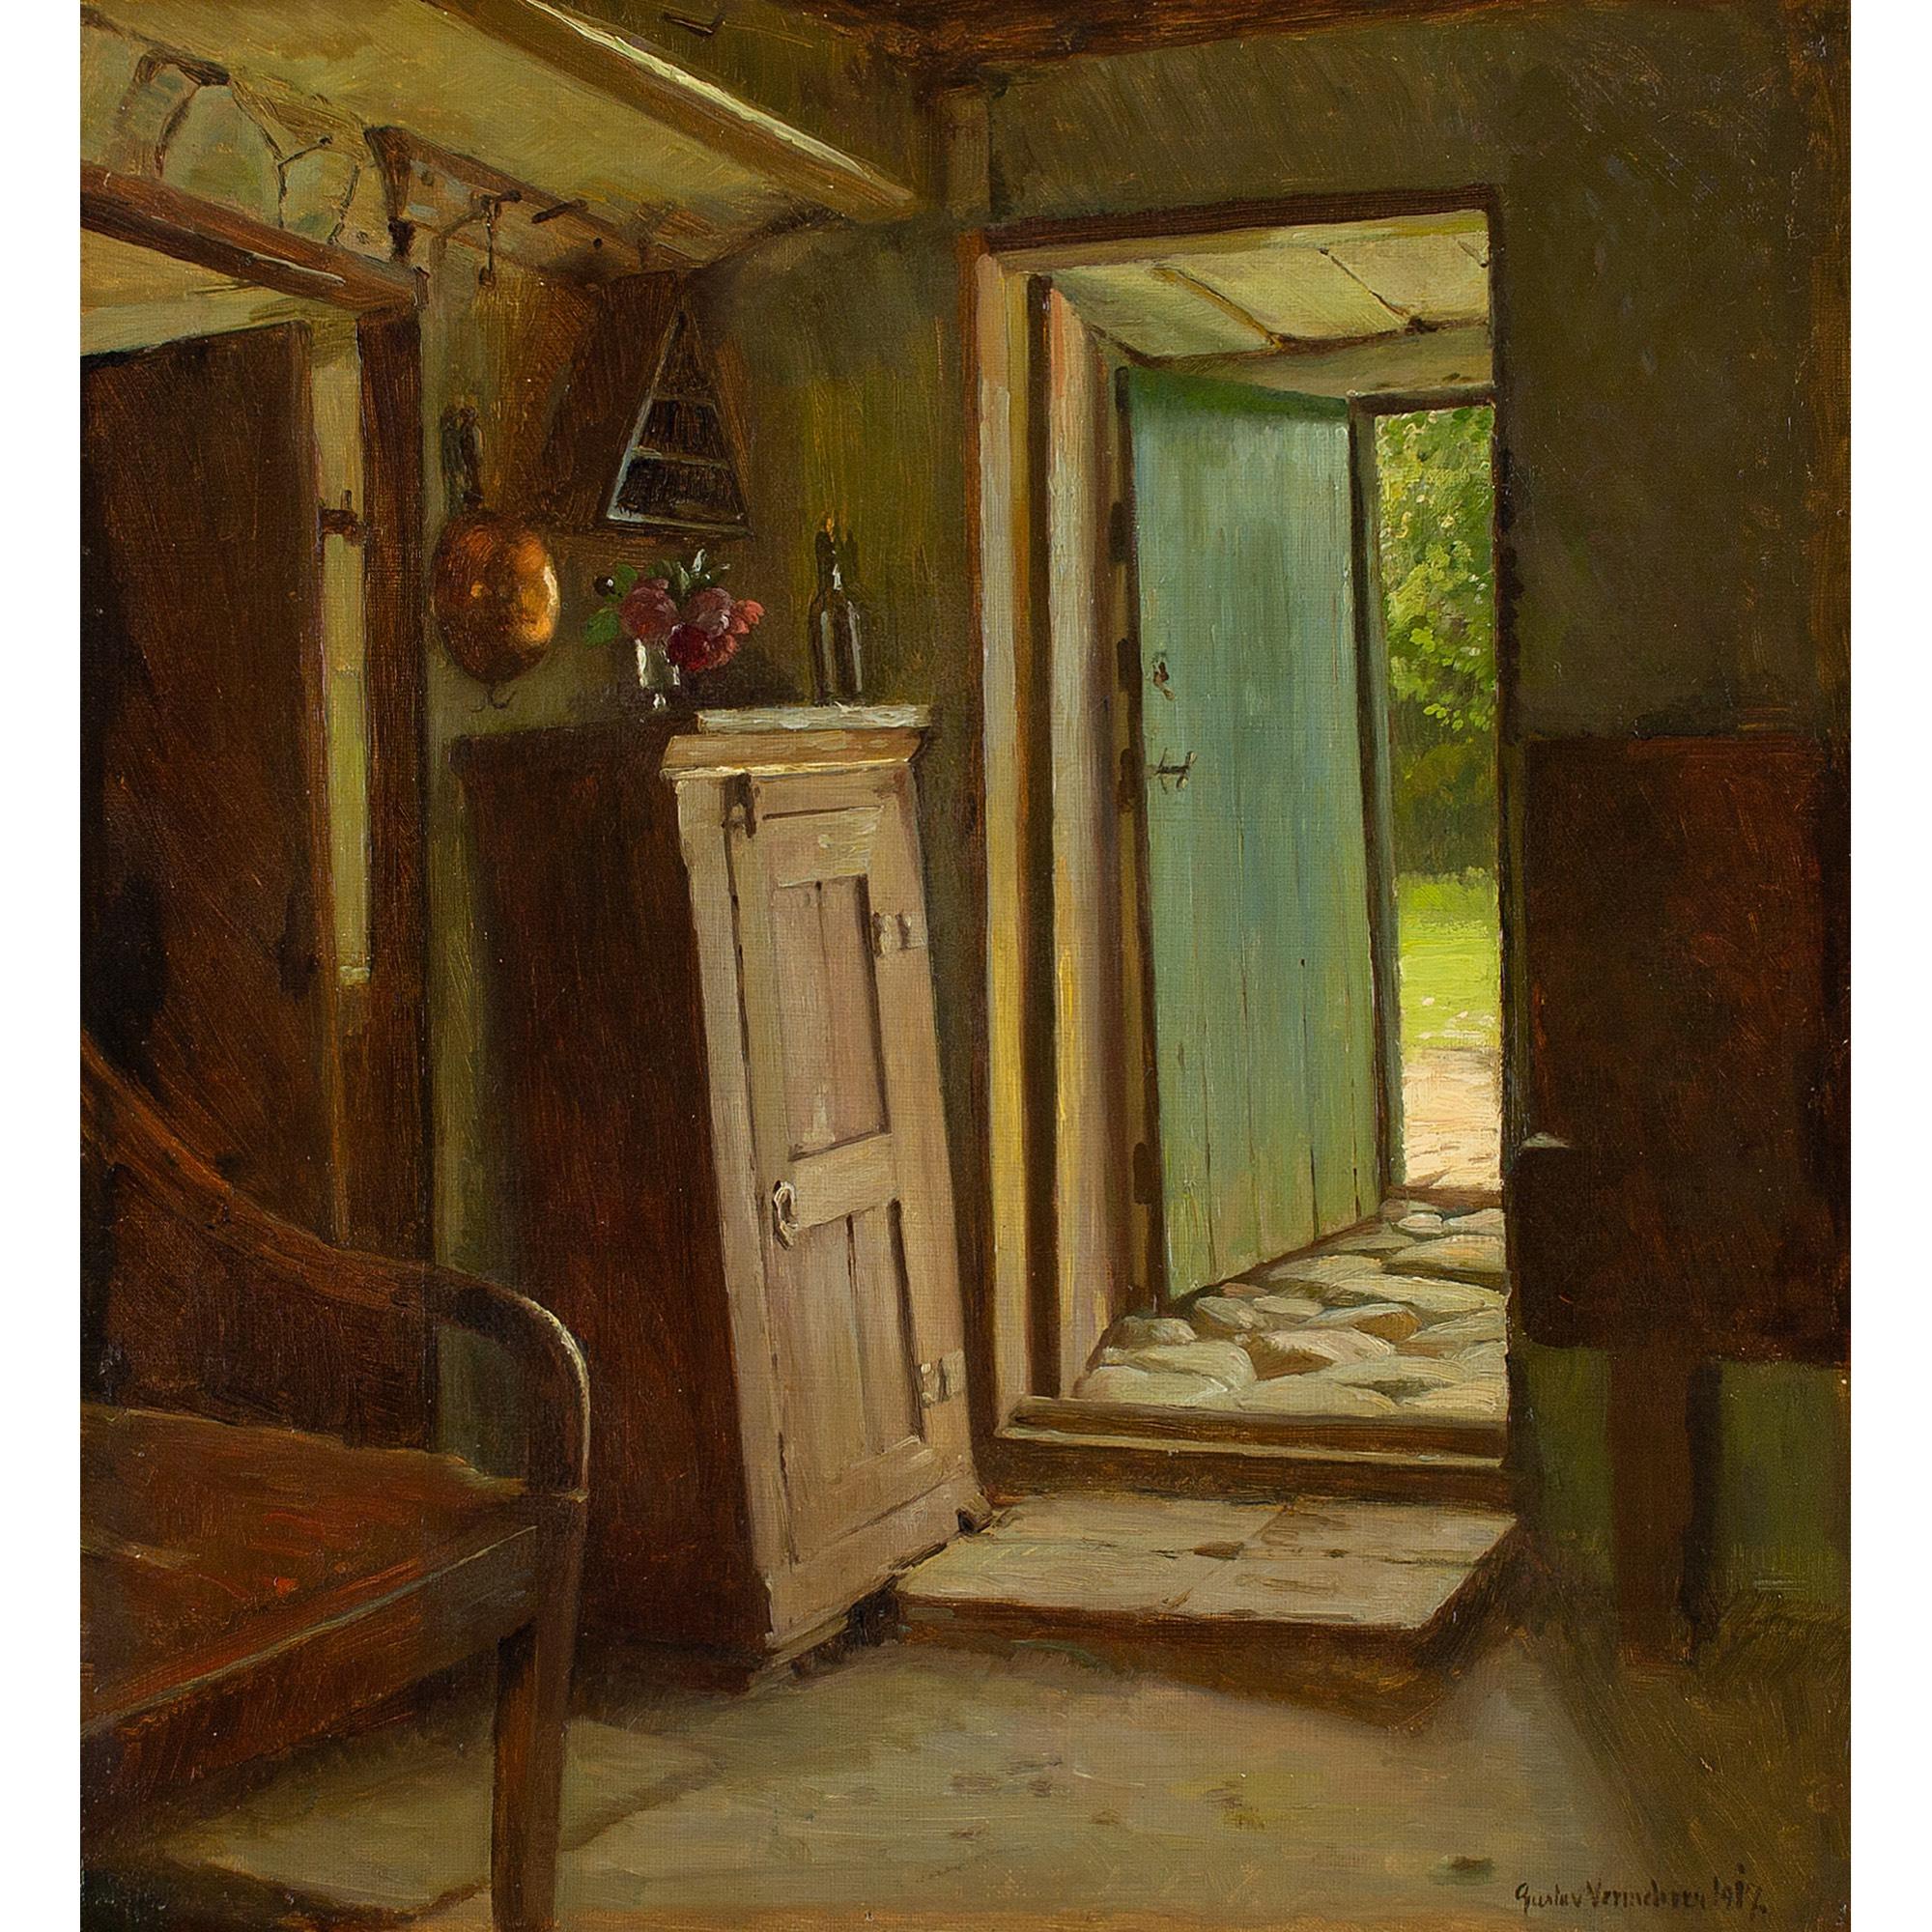 This early 20th-century oil painting by Danish artist Gustav Vermehren (1863-1931) depicts a rustic cottage interior with an open door and cupboard.

Leaning somewhat precariously on the edge of a wooden step, a cupboard catches the light. A bottle